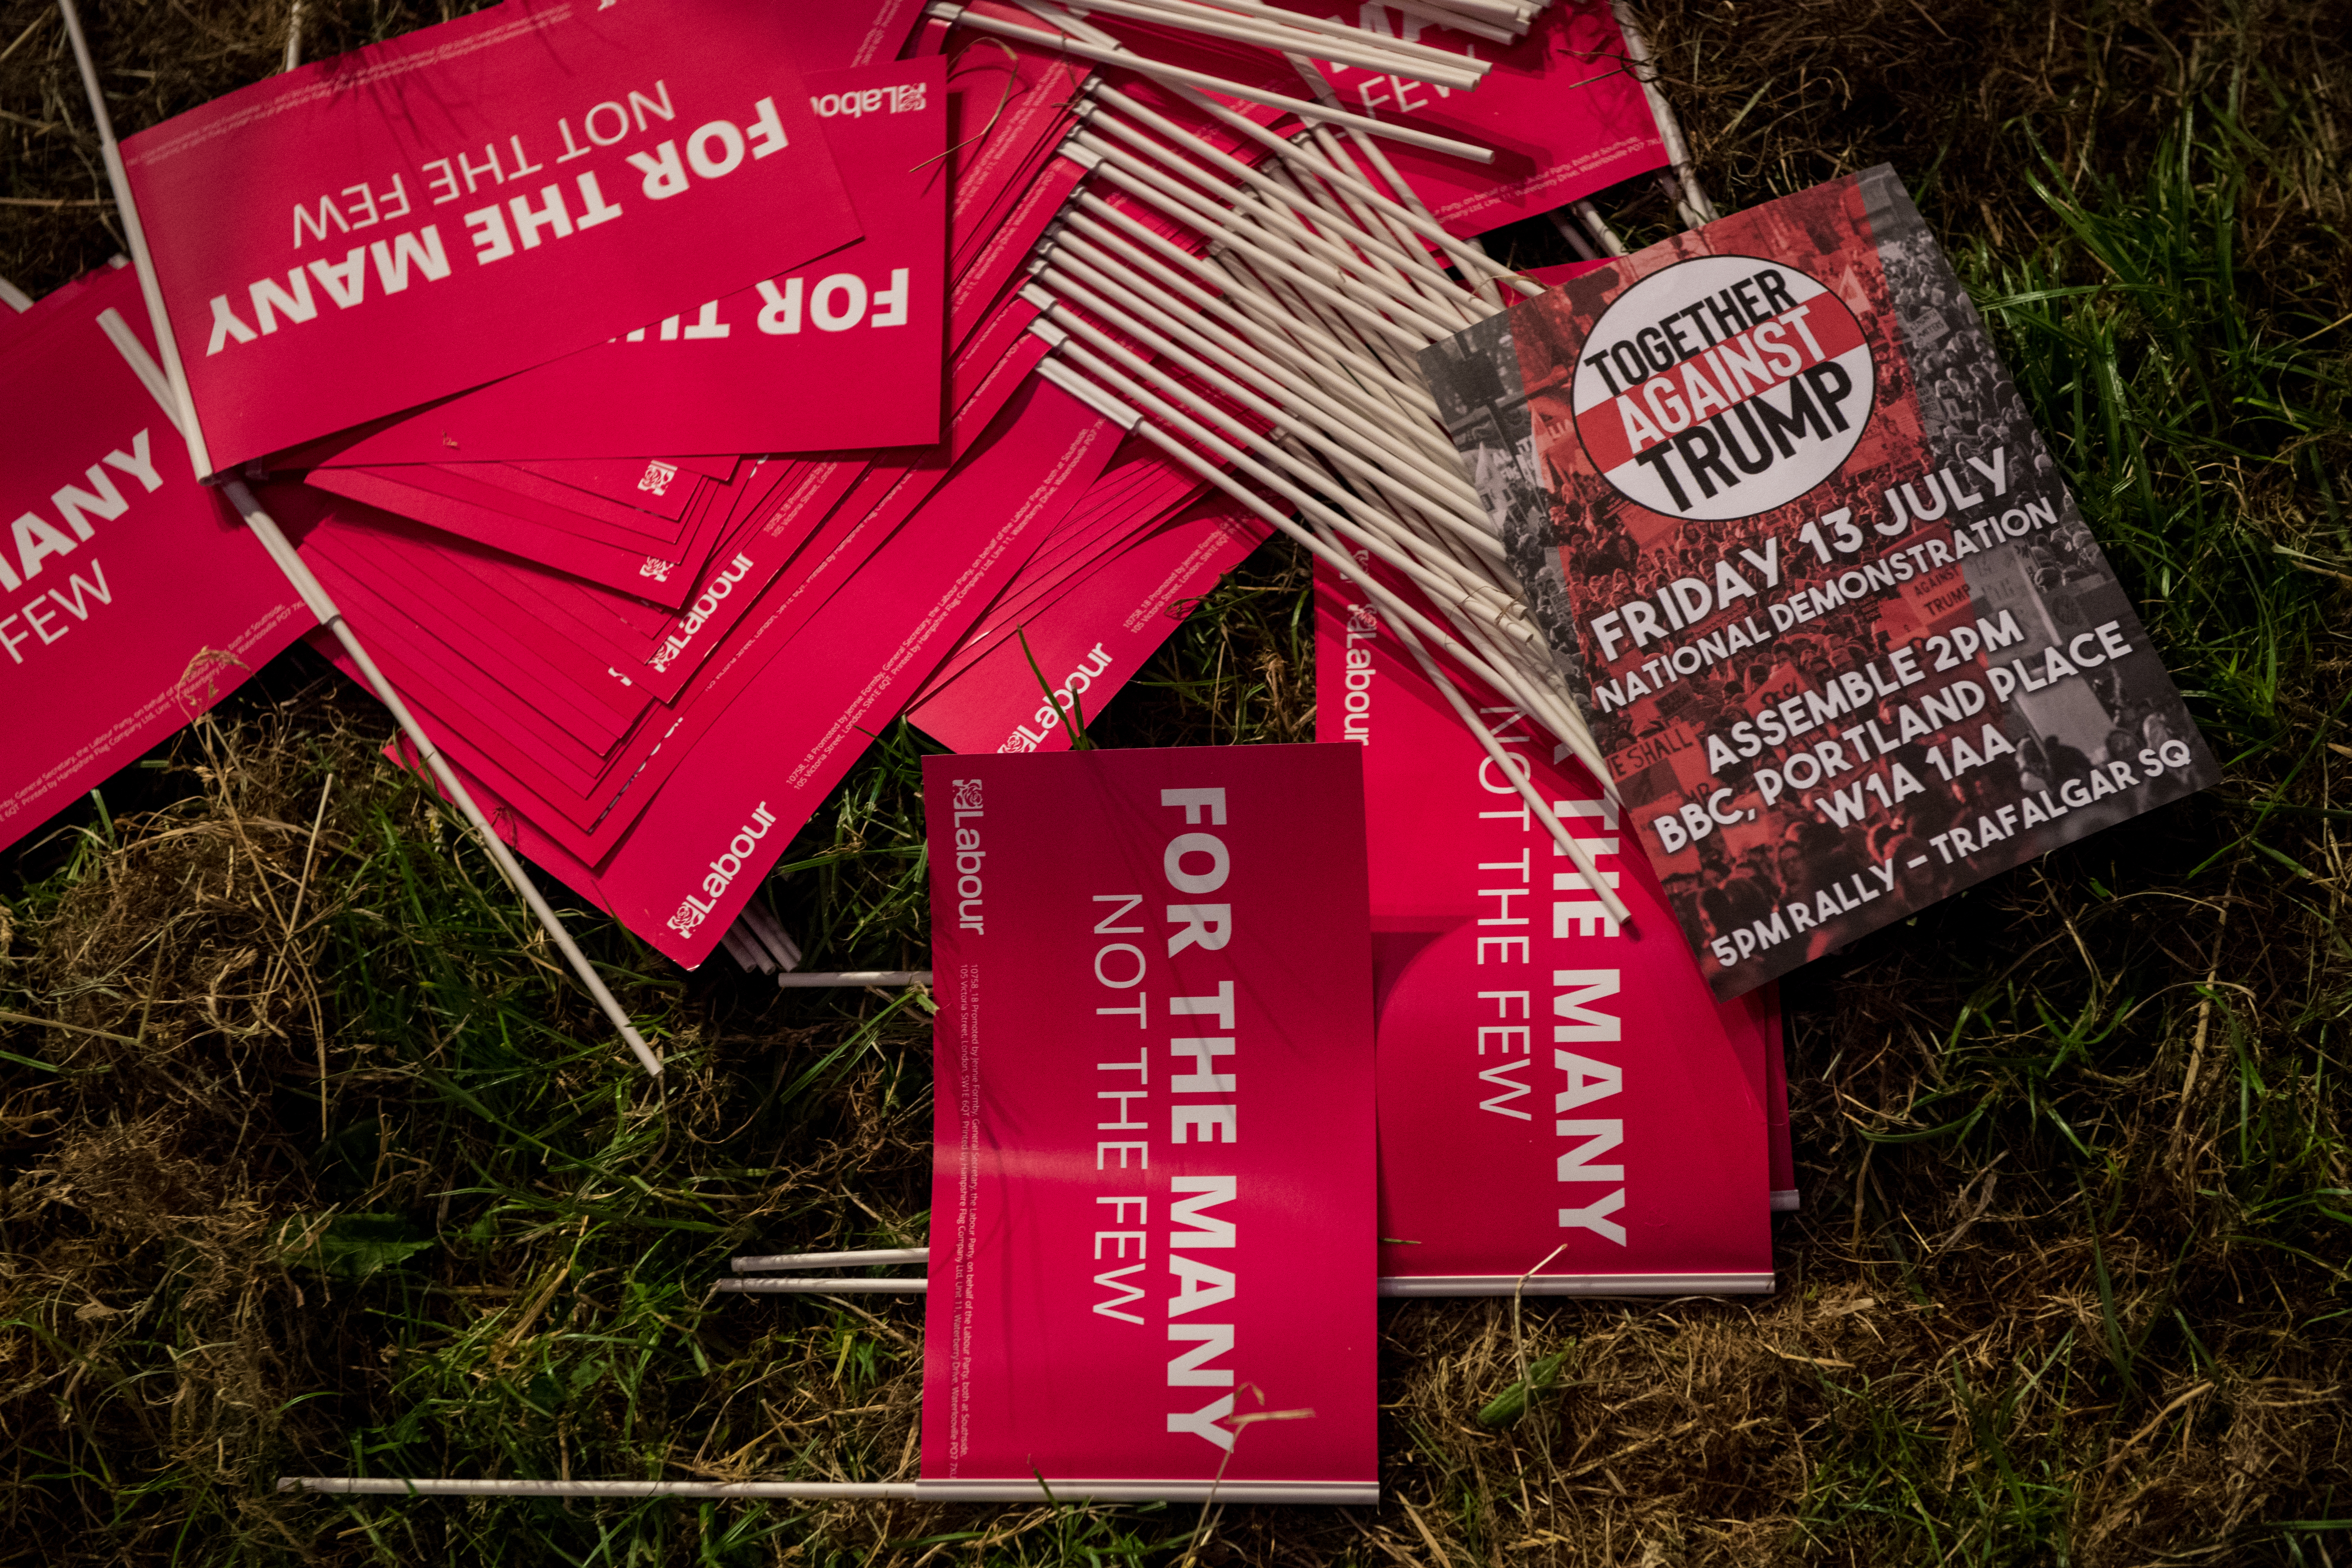 A leaflet for a July protest against Trump is seen amongst Labour party flags on June 16, 2018 in London, England.  